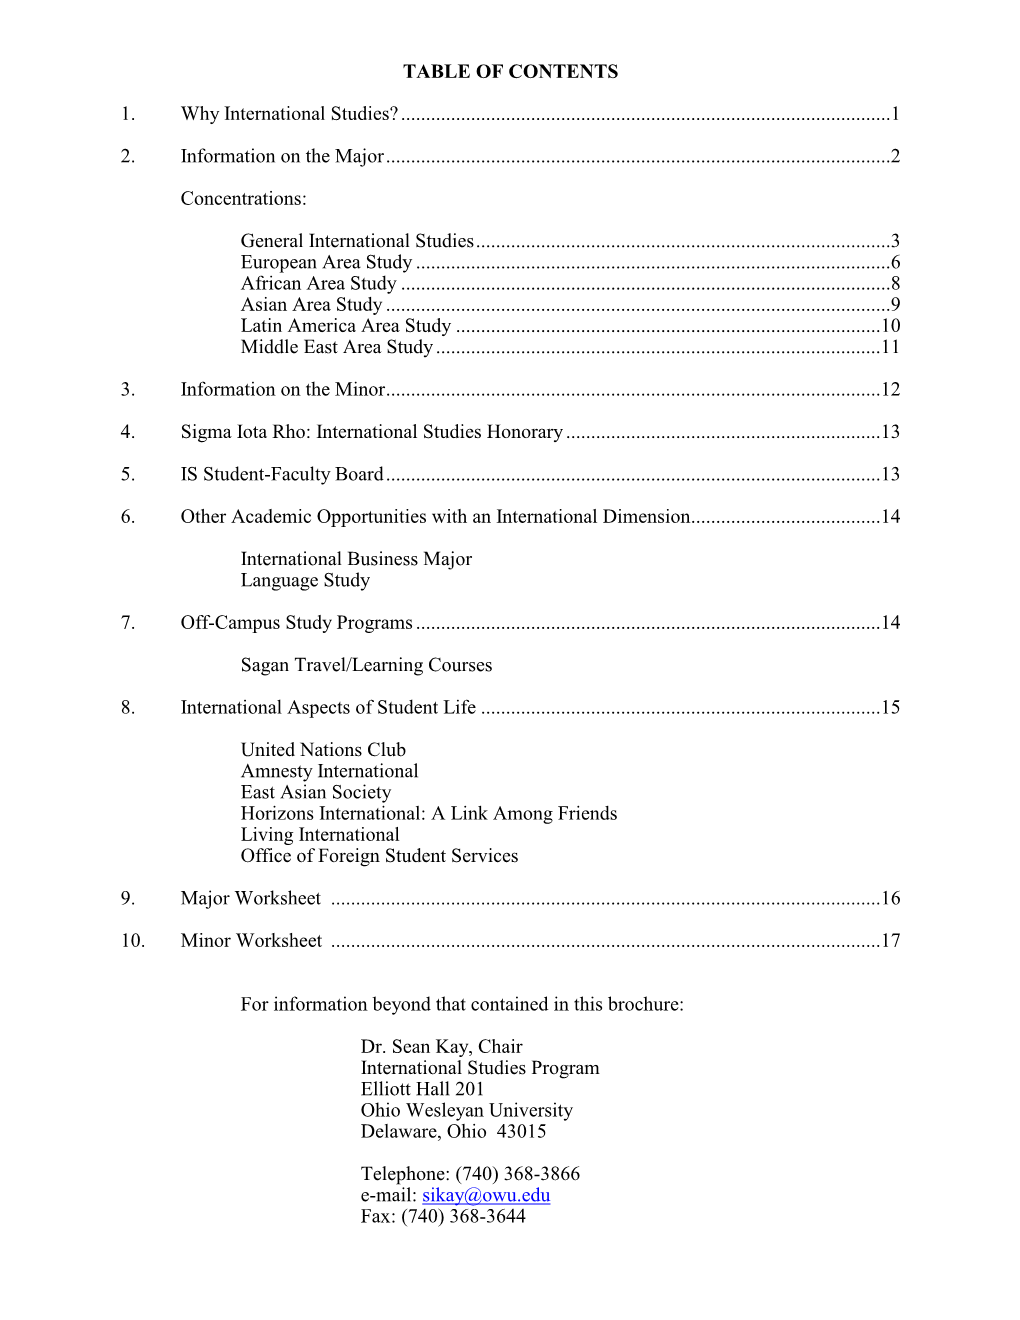 TABLE of CONTENTS 1. Why International Studies